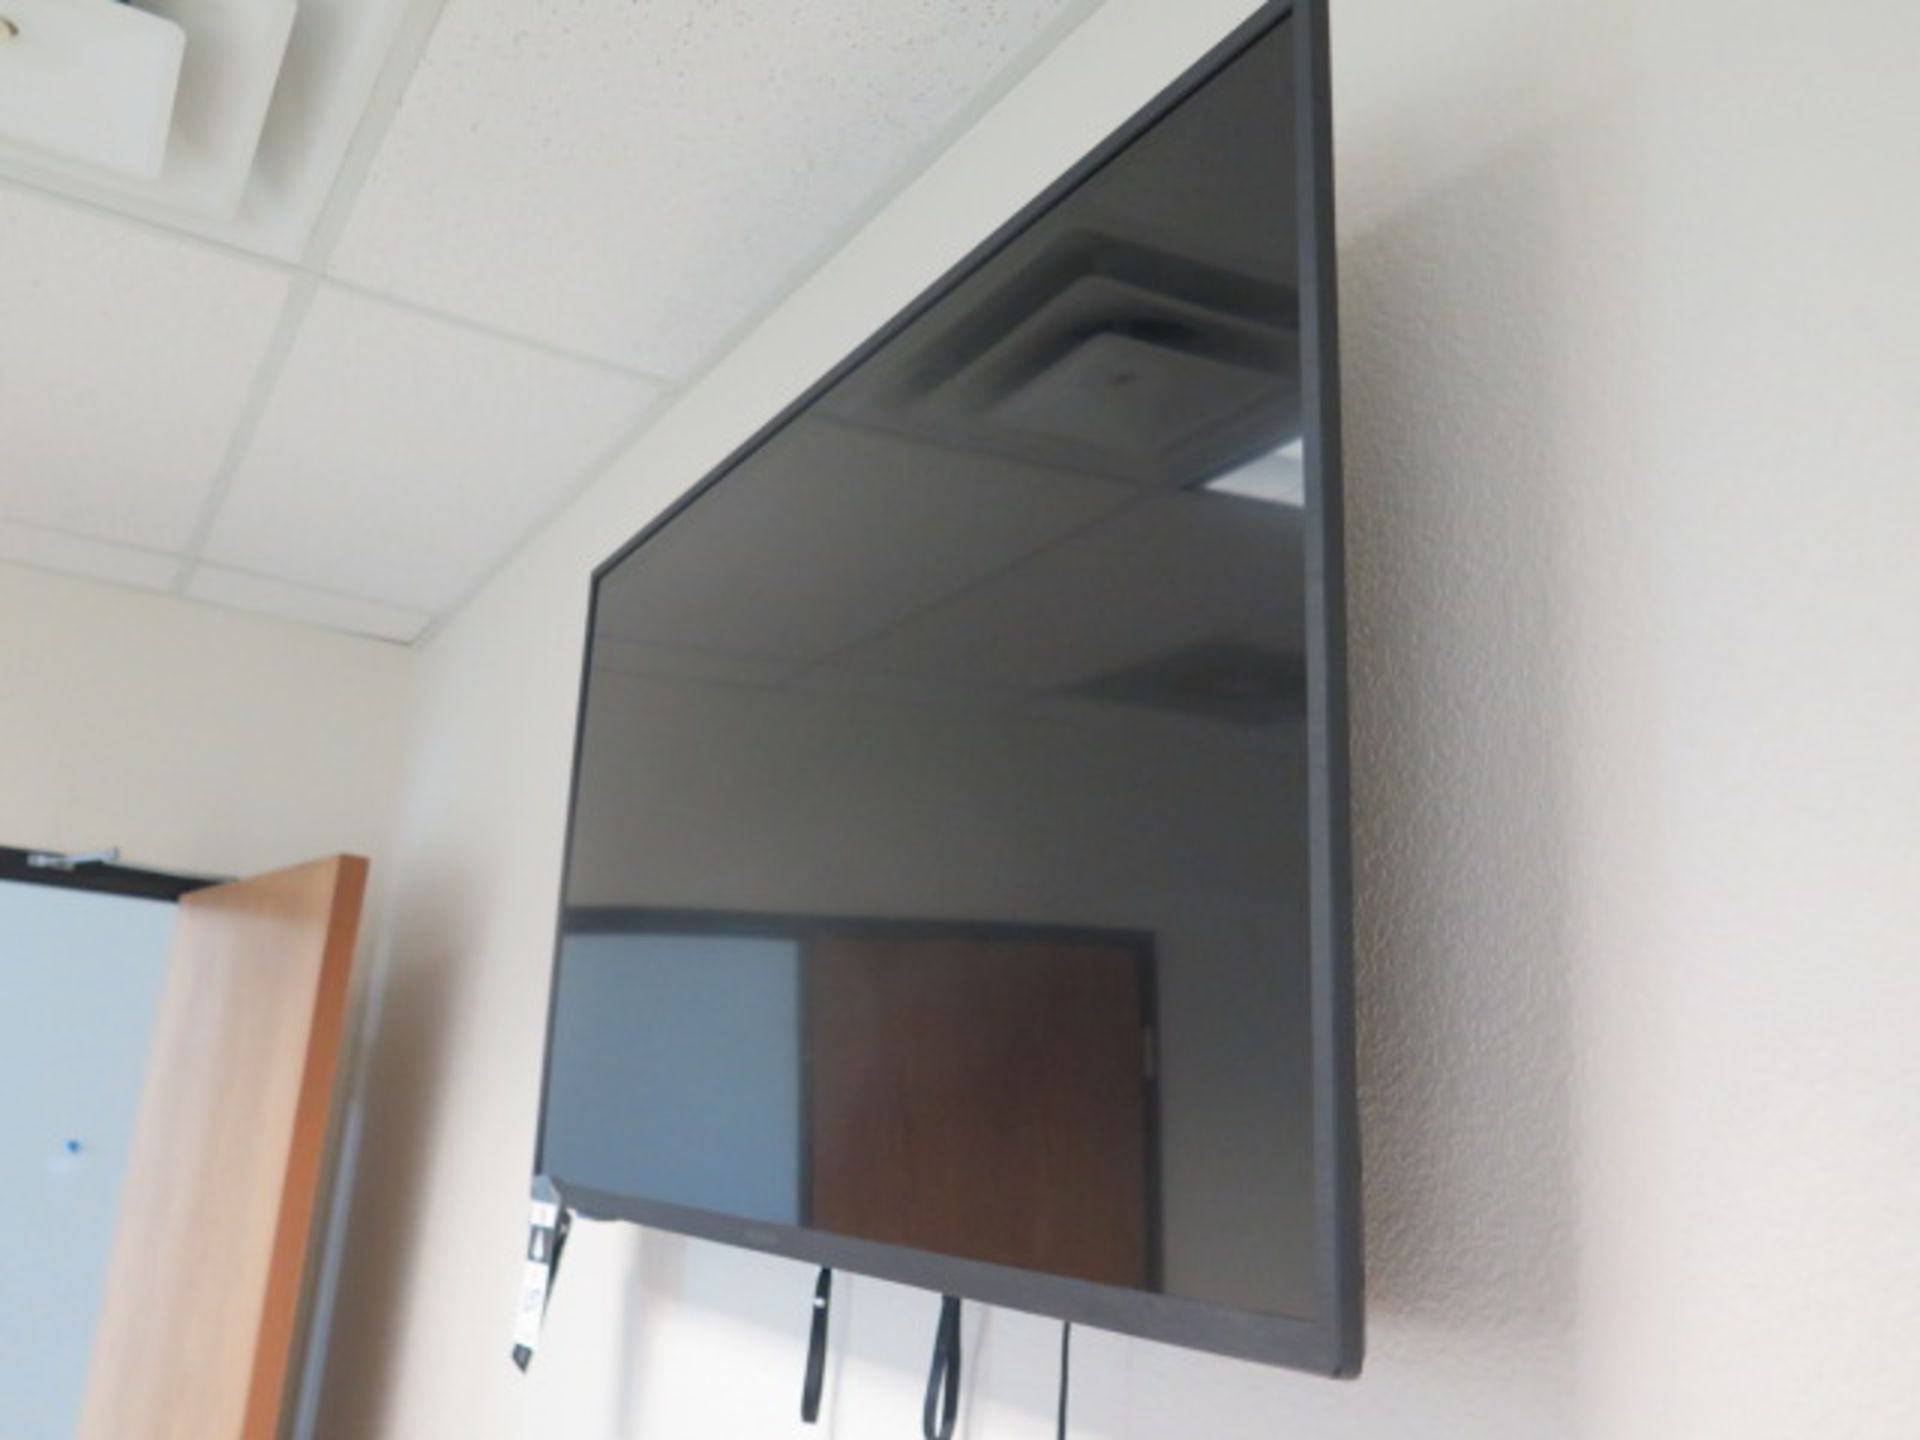 Insignia TV (ON WALL) (SOLD AS-IS - NO WARRANTY) - Image 3 of 5